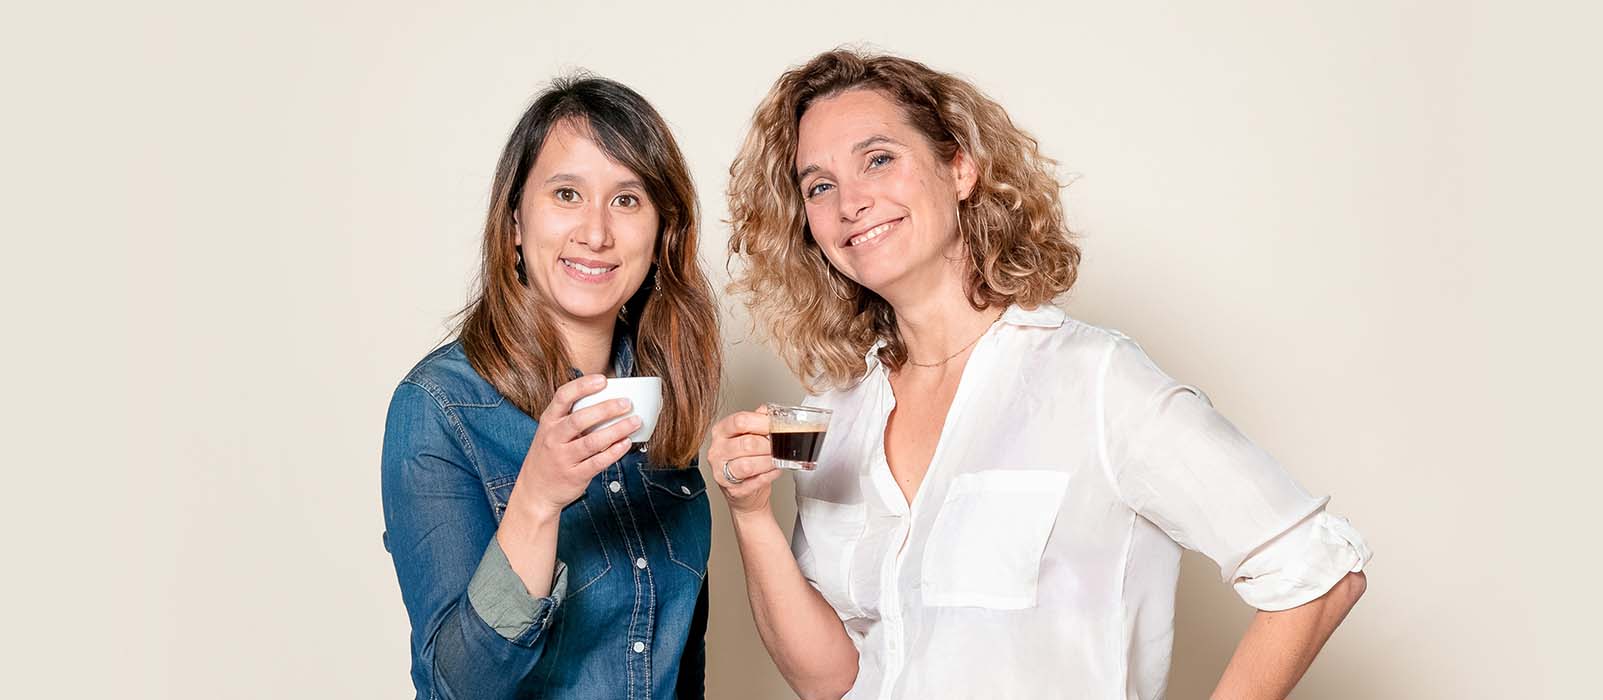 MaxiCoffee experts